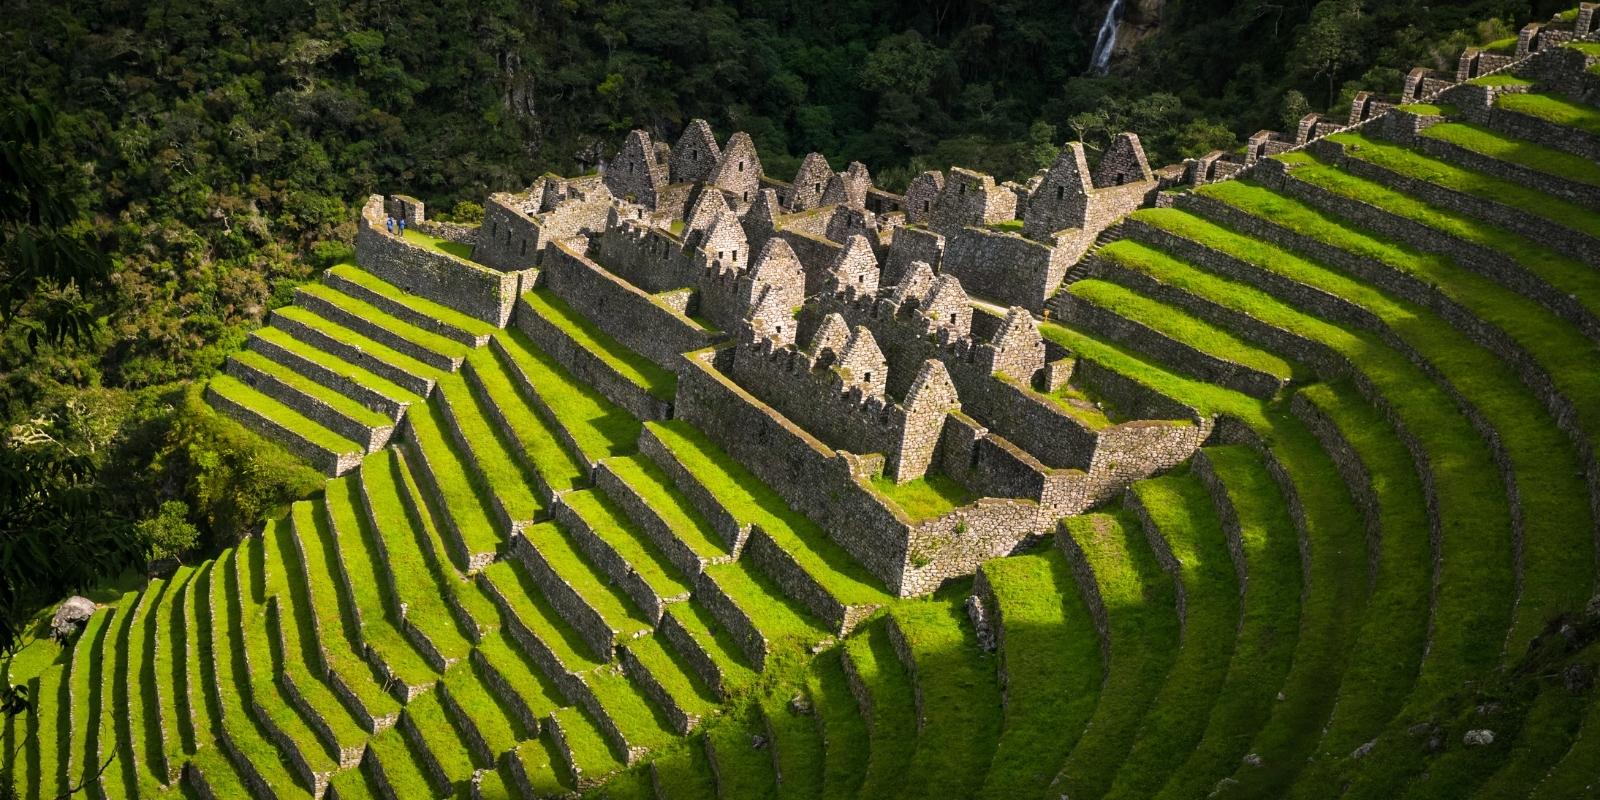 ATTRACTIONS TO SEE ON THE SHORT INCA TRAIL HIKE TO MACHU PICCHU